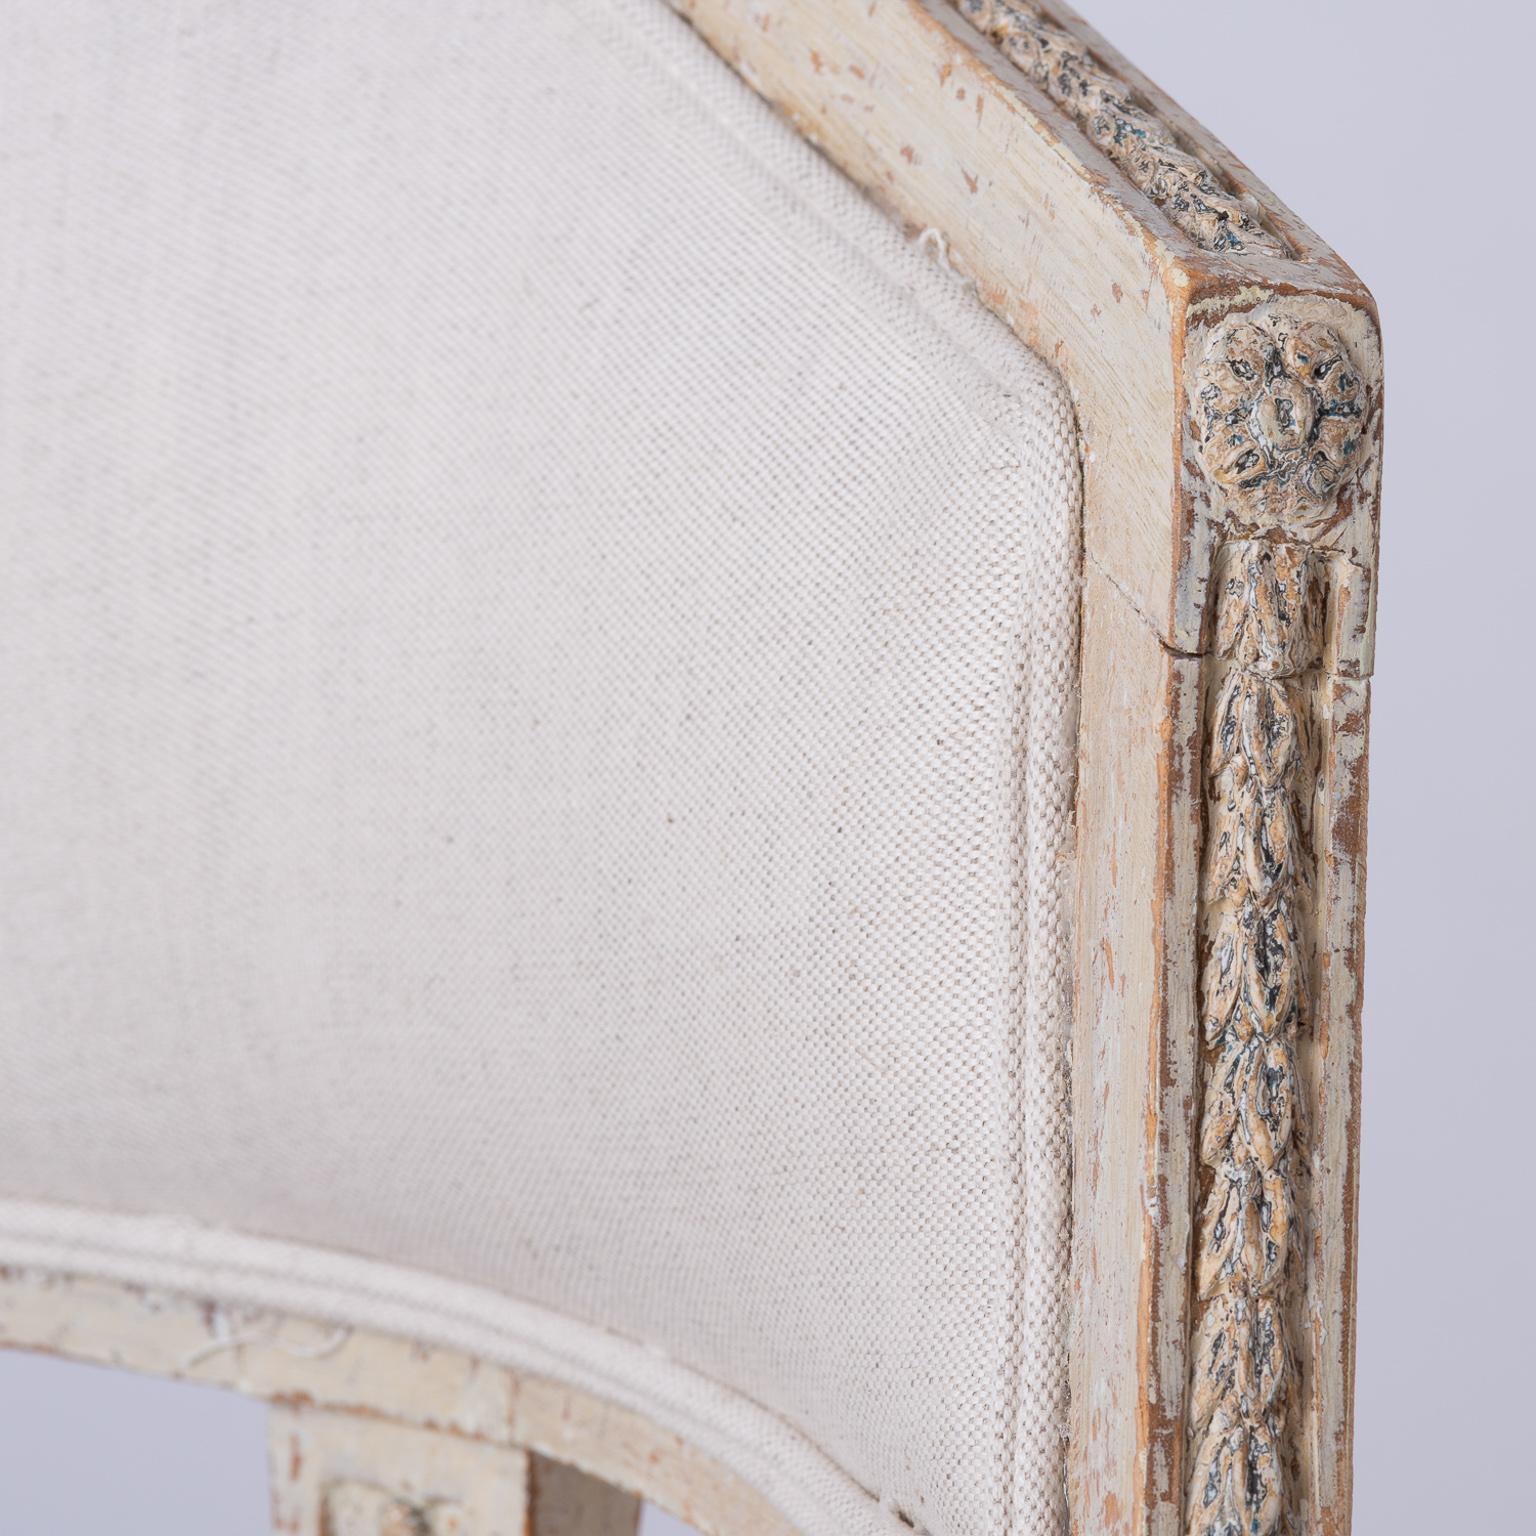 These high quality period chairs have delicate carvings across the back, accented with a flower medallion at the corners. The same motif is repeated on the apron and sides. The reeded acanthus legs have the added detail of a raised collar at the top